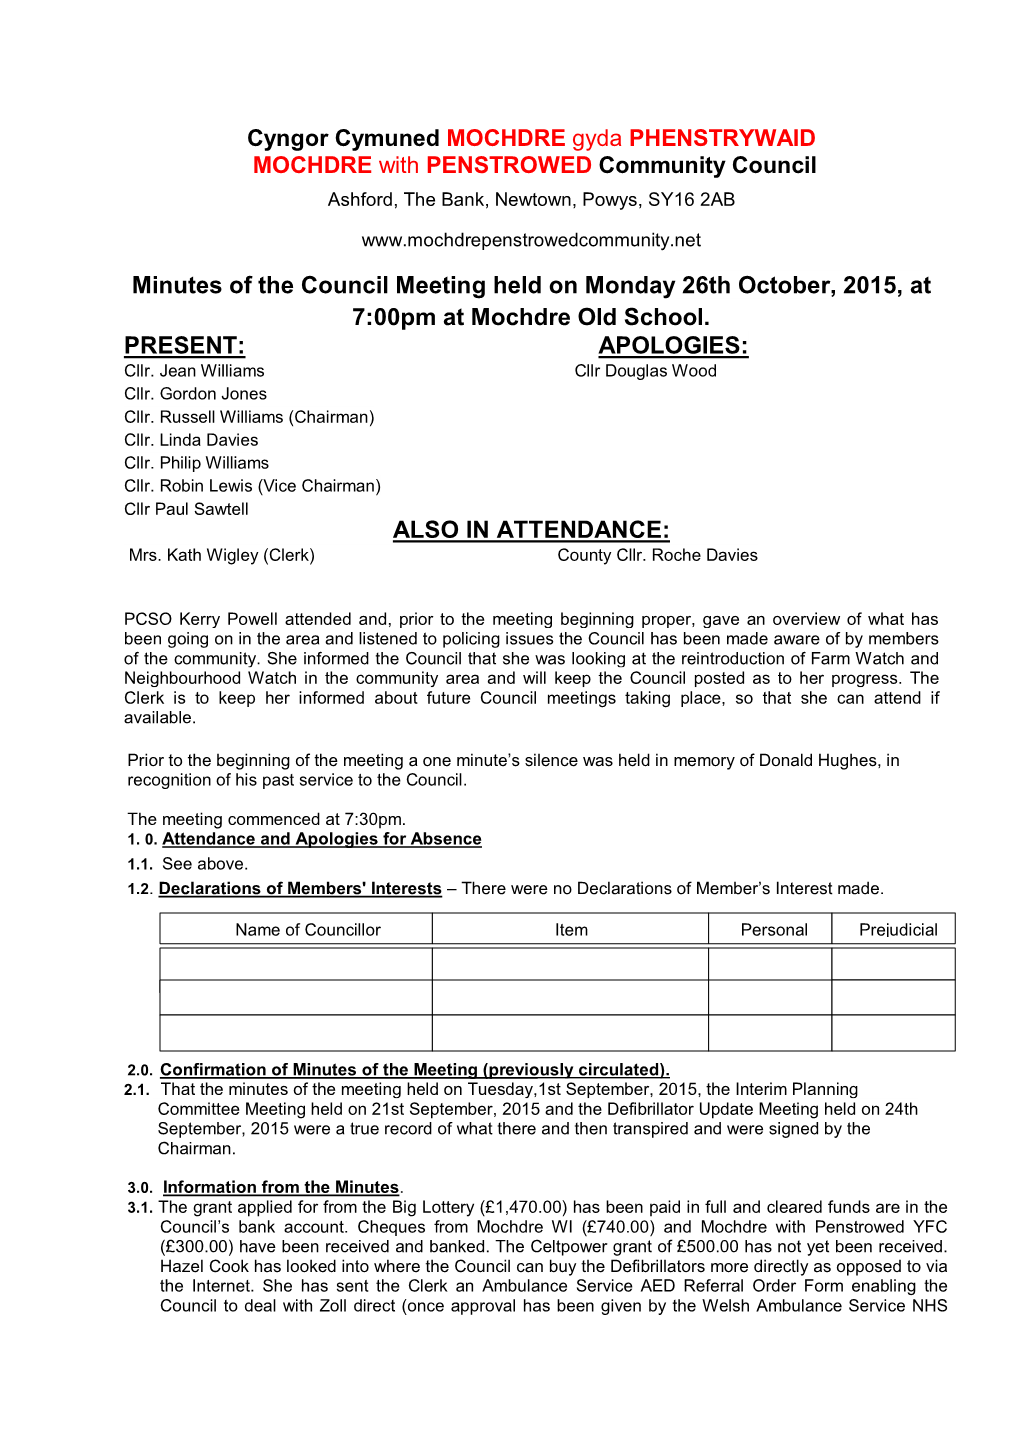 Minutes of the Council Meeting Held on Monday 26Th October, 2015, at 7:00Pm at Mochdre Old School